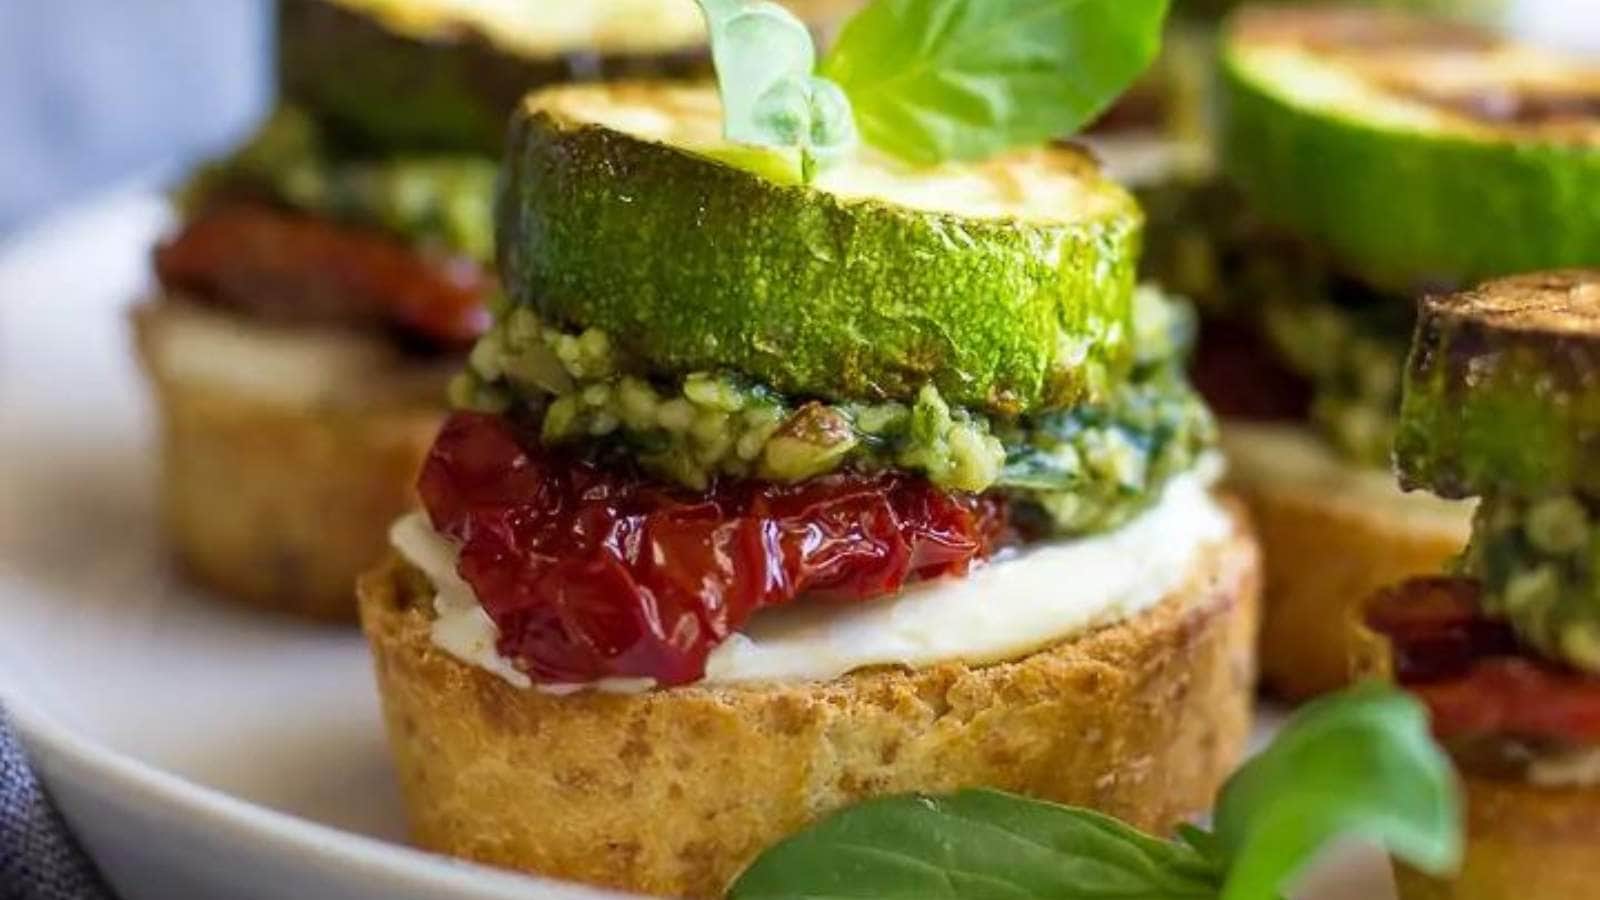 Bruschetta With Pesto And Sun-Dried Tomatoes recipe by Lavender And Macarons.